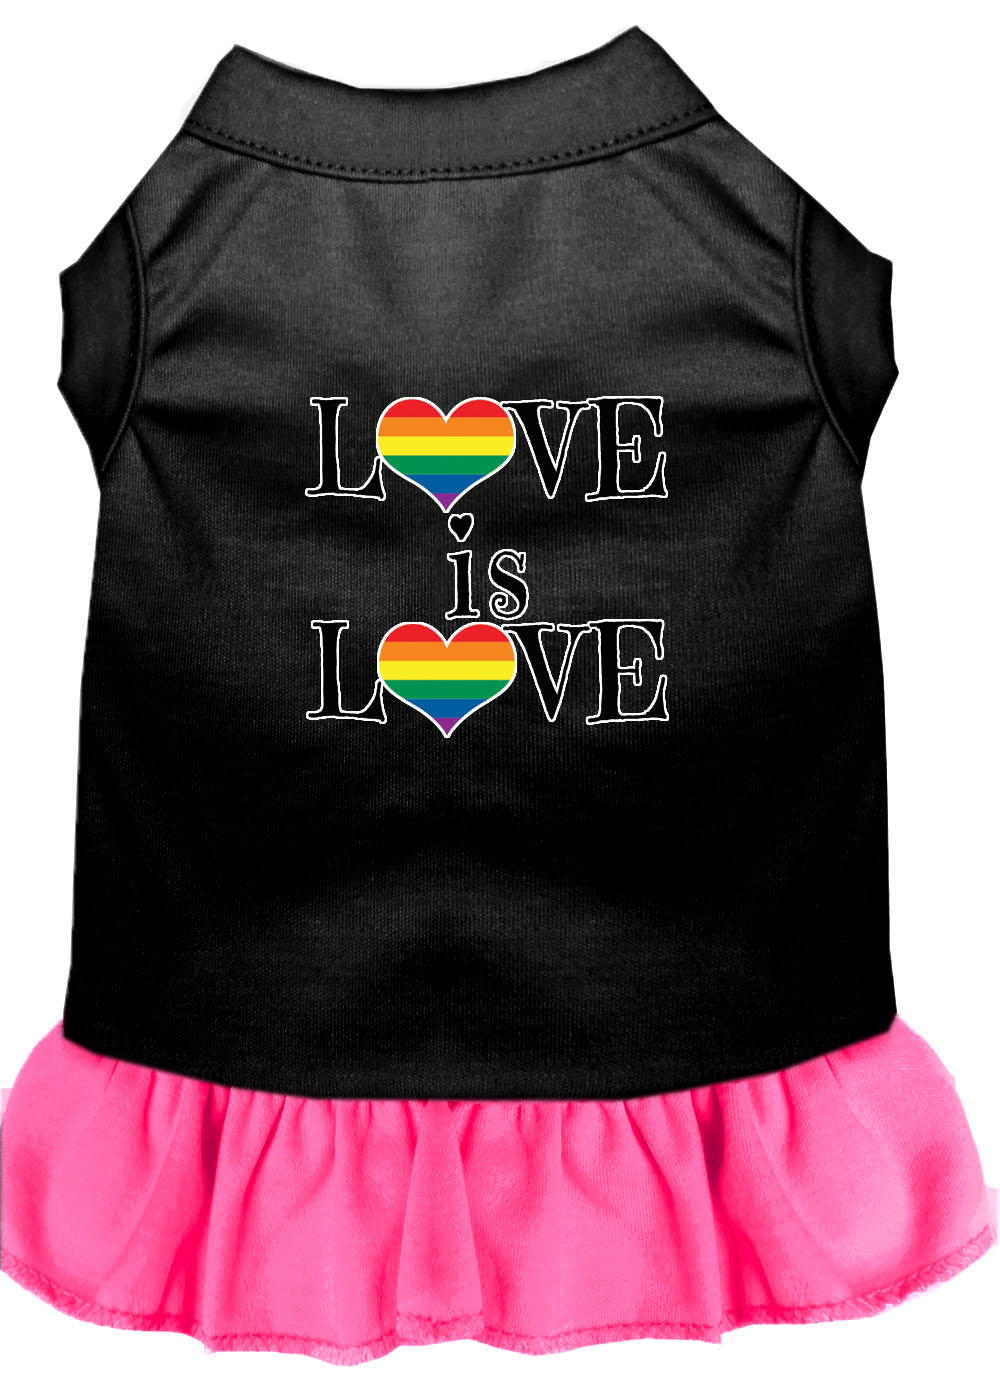 Love is Love Screen Print Dog Dress Black with Bright Pink Med